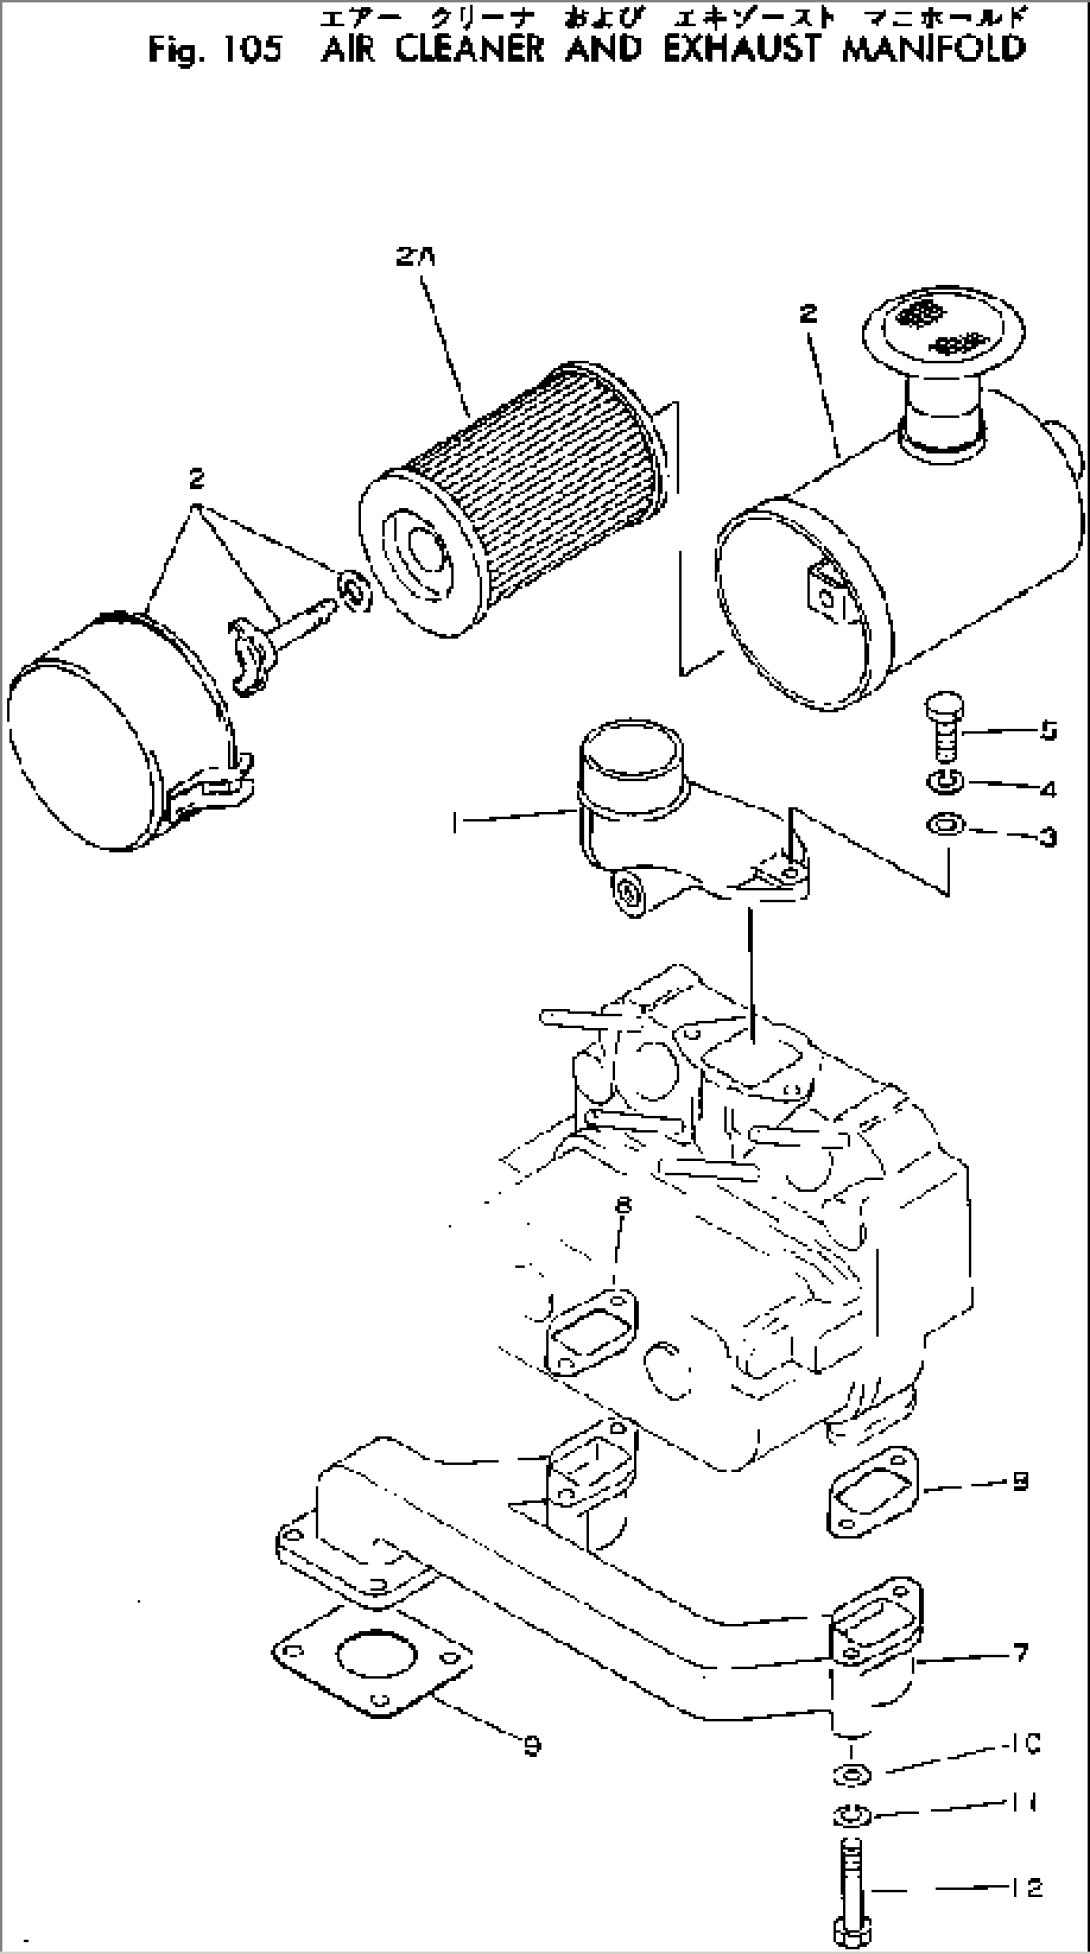 AIR CLEANER AND EXHAUST MANIFOLD